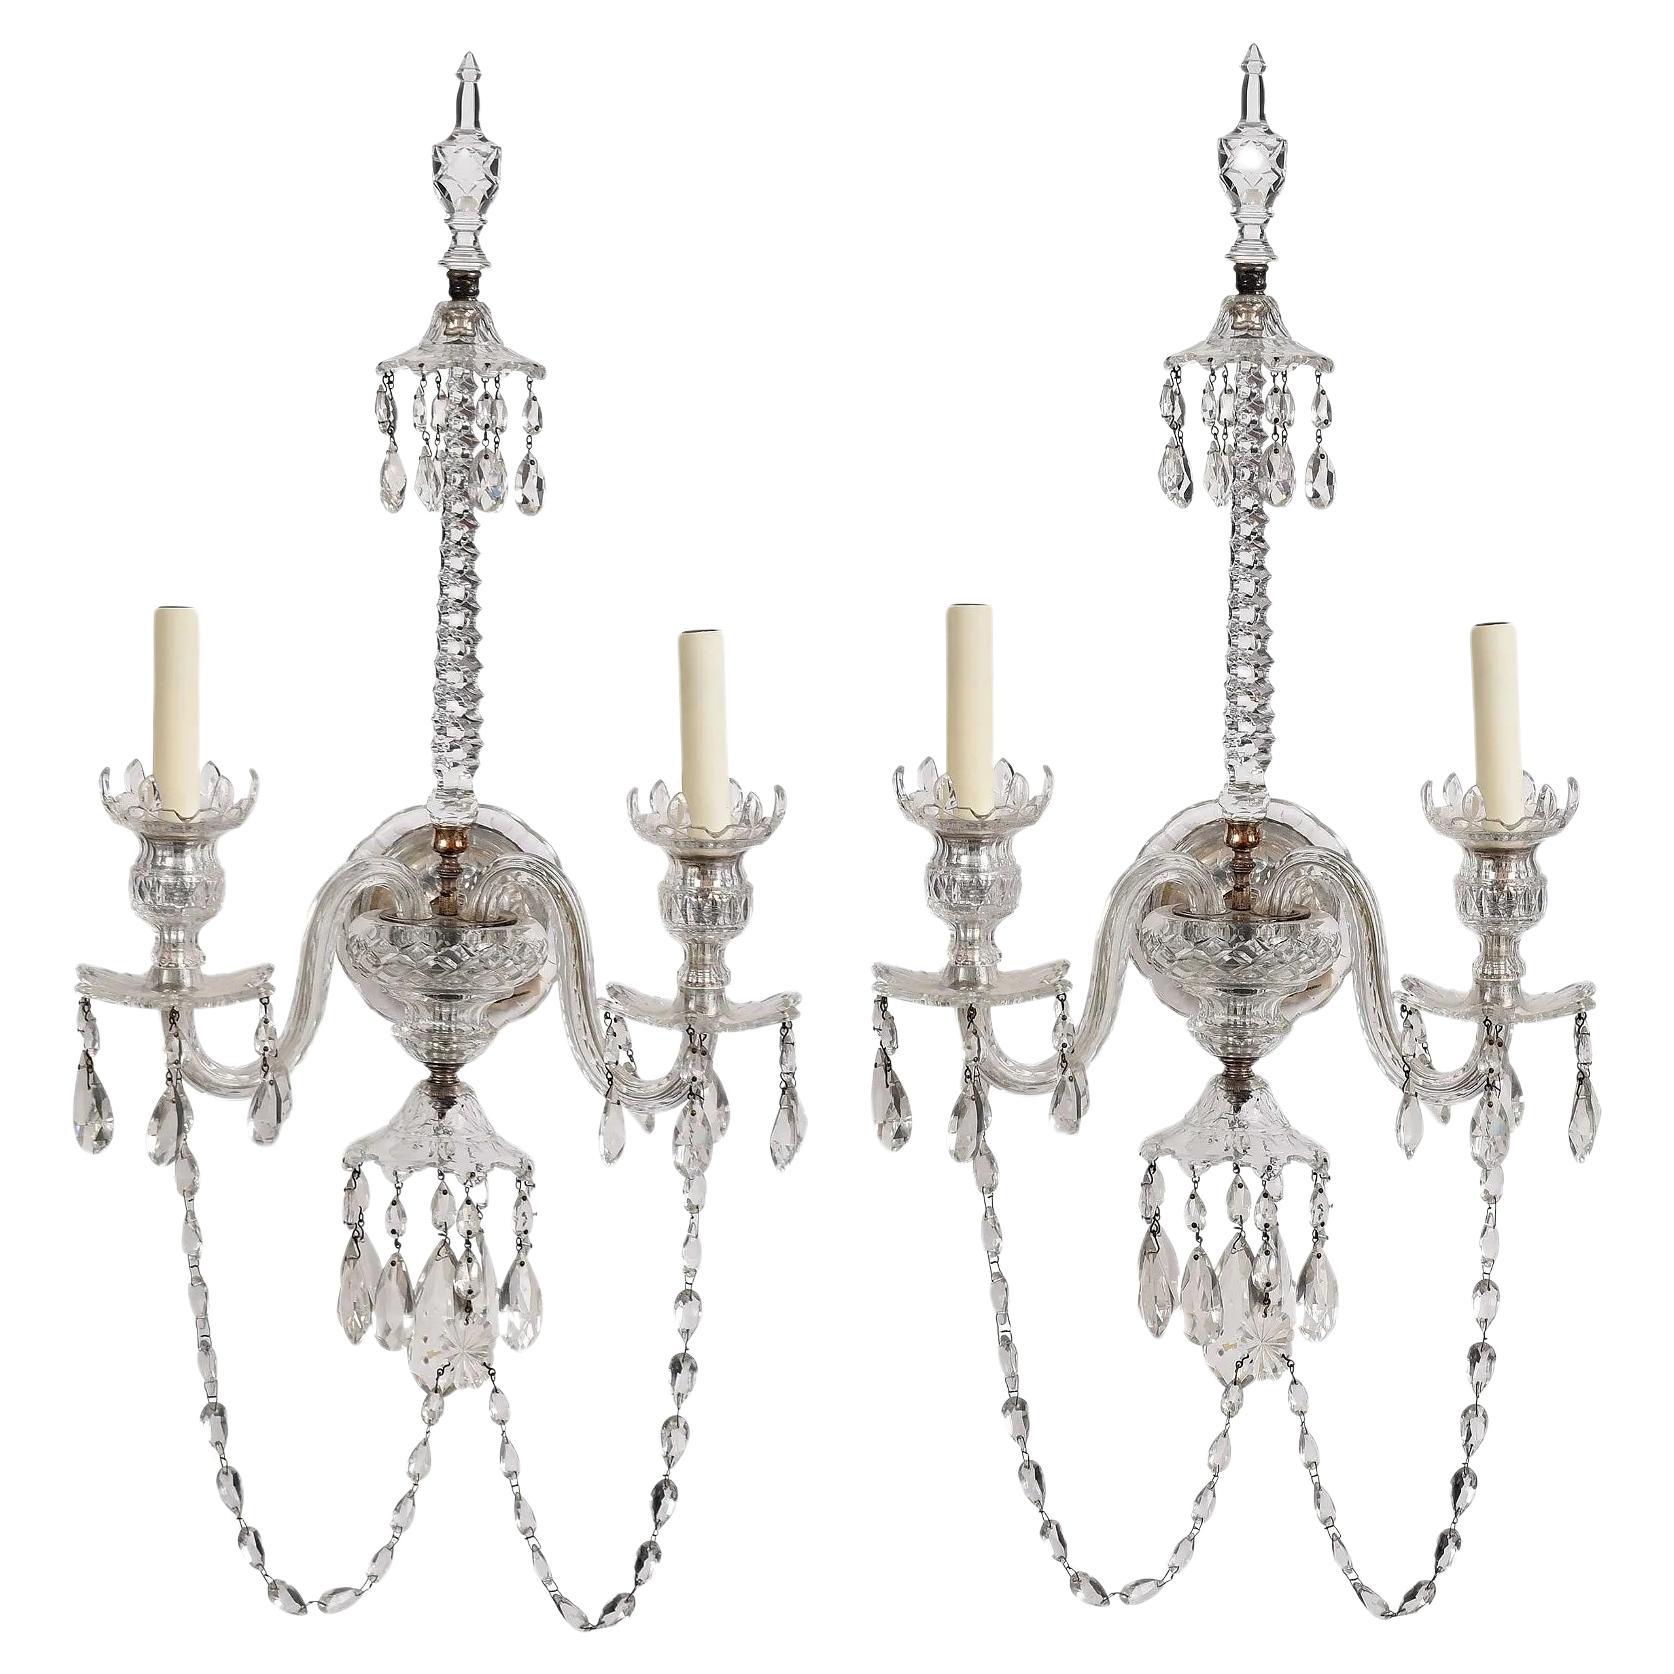 George III Wall Lights and Sconces